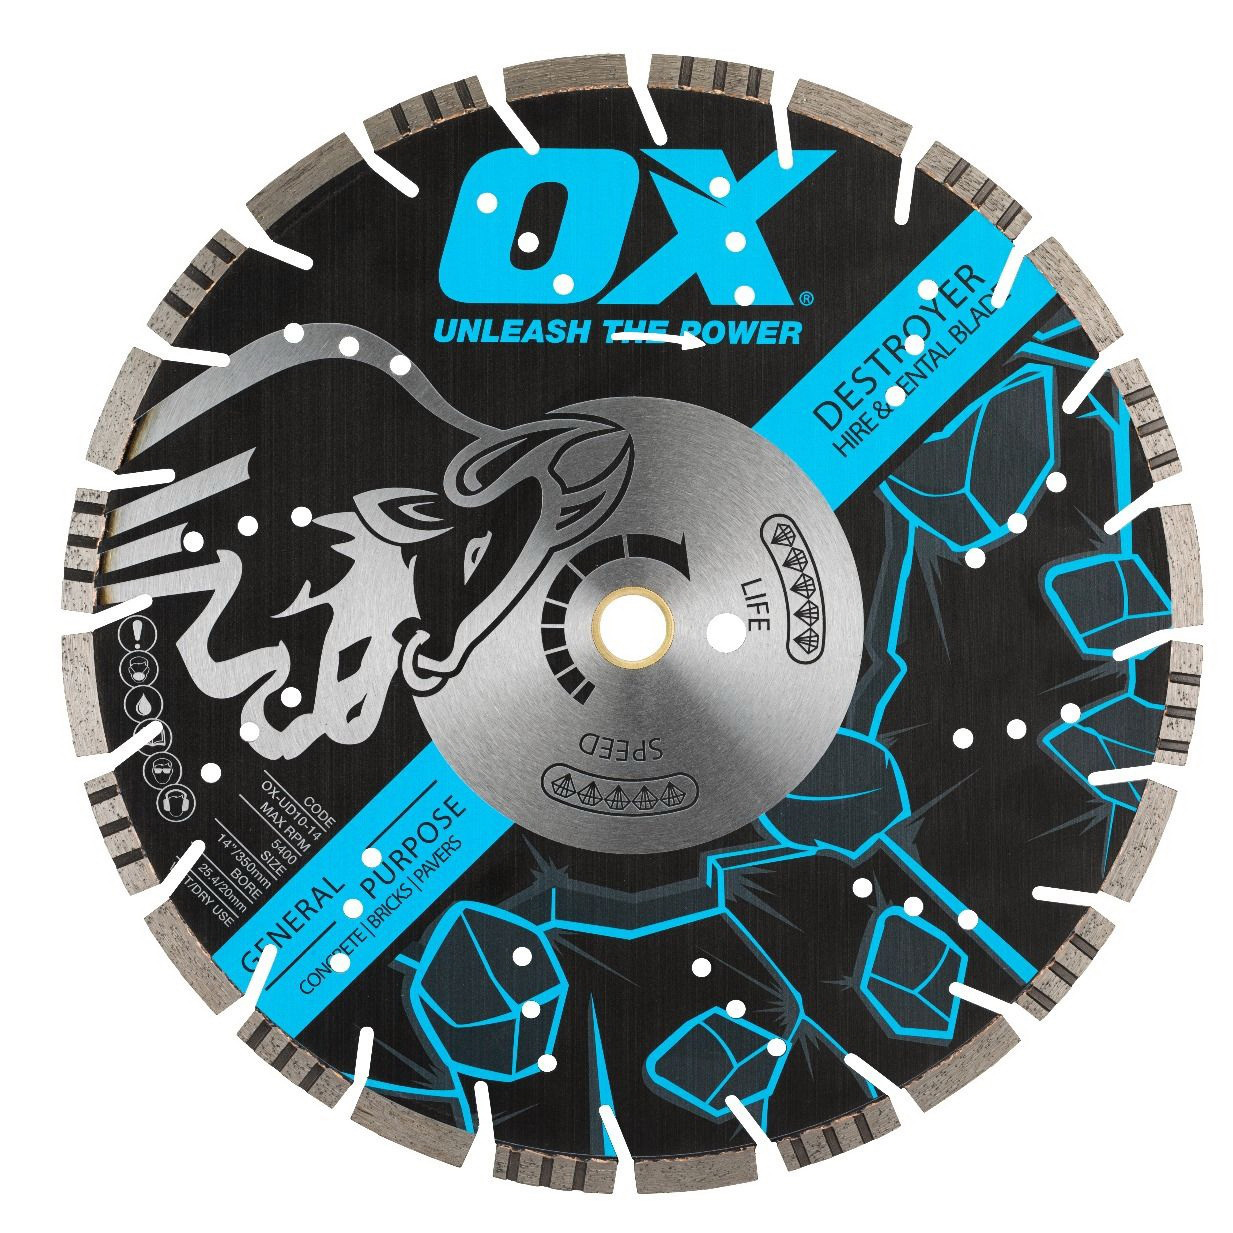 ULTIMATE OXTREME UDH10 OX-UDH10-14 Multi-Cut Blade, 14 in Dia, 1 to 20 mm Arbor, Steel Cutting Edge